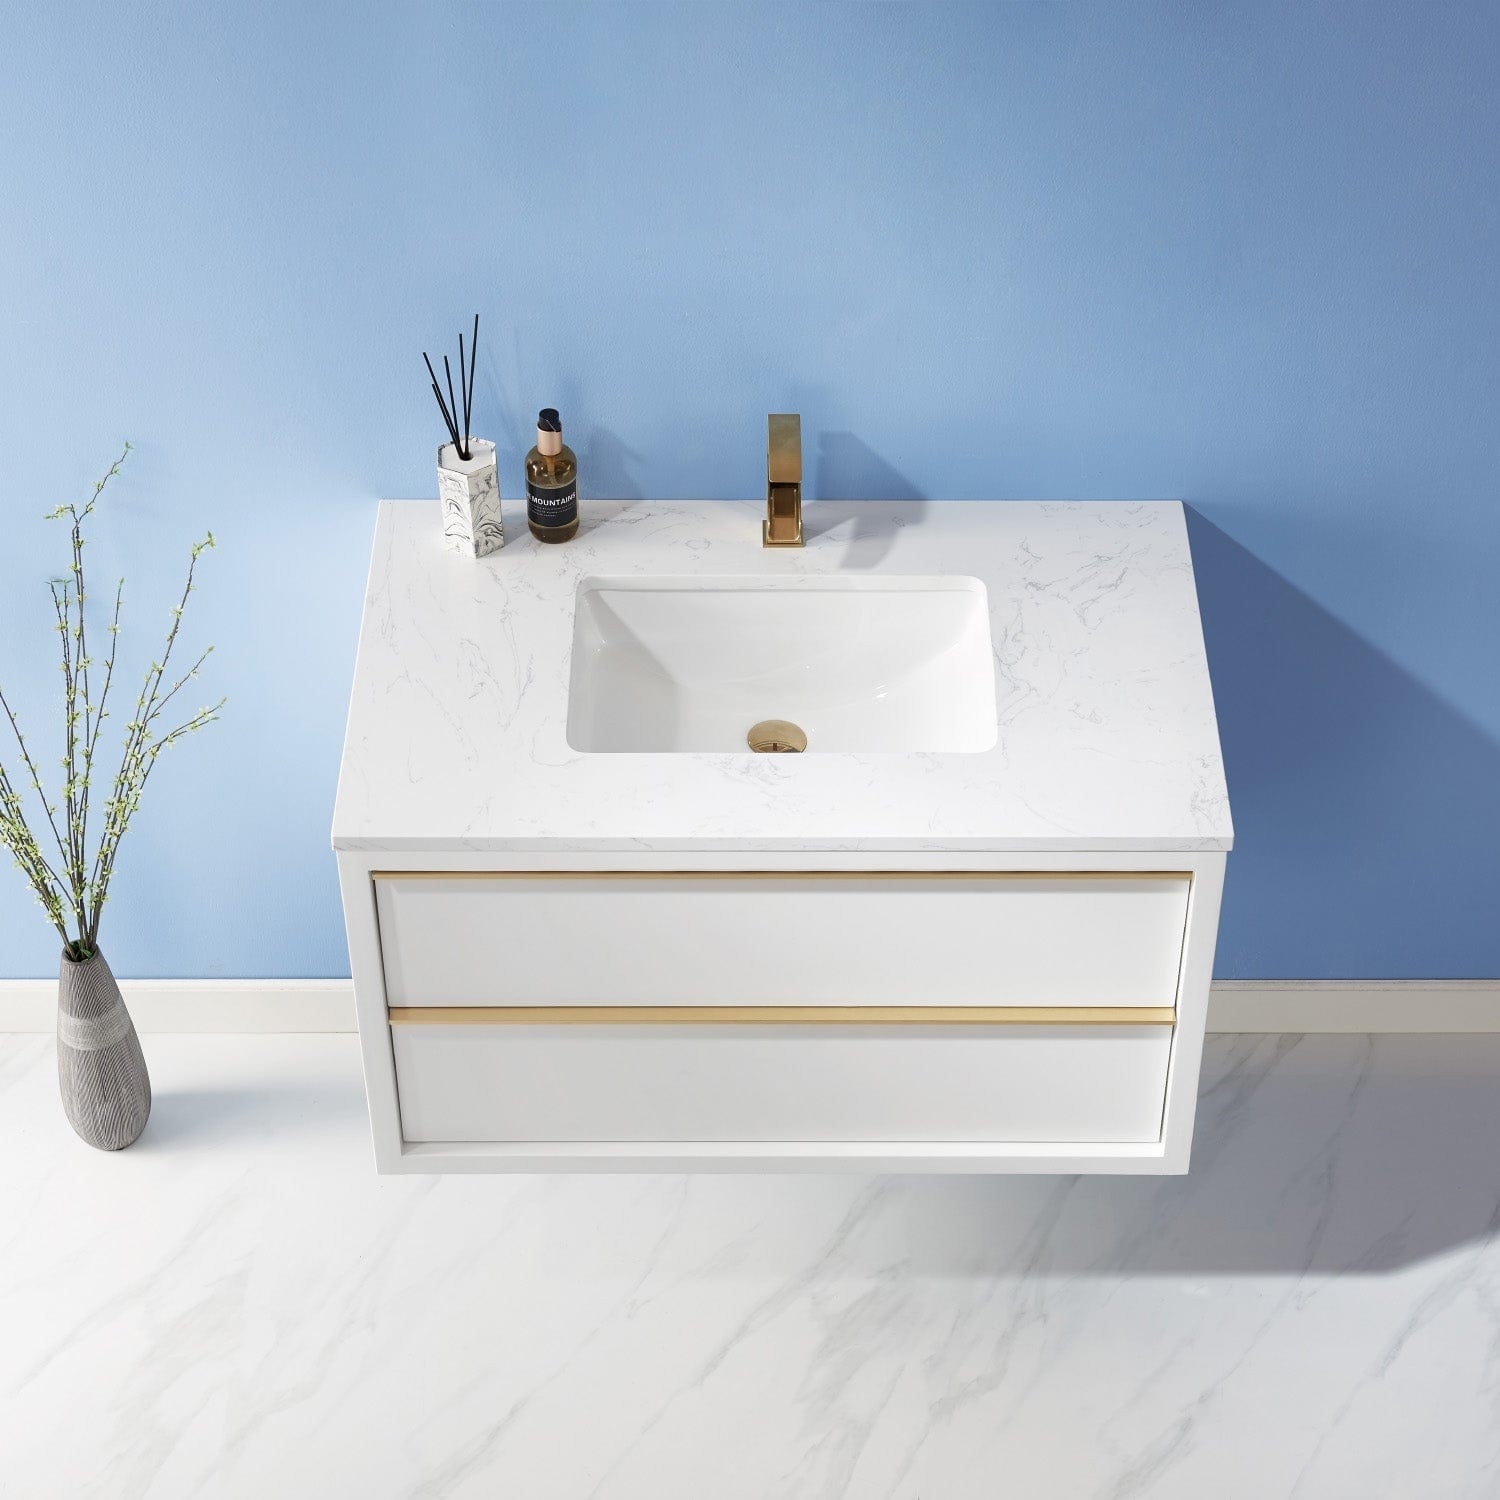 Altair Morgan 36" Single Bathroom Vanity Set in White and Composite Carrara White Stone Countertop without Mirror 534036-WH-AW-NM - Molaix631112971768Vanity534036-WH-AW-NM